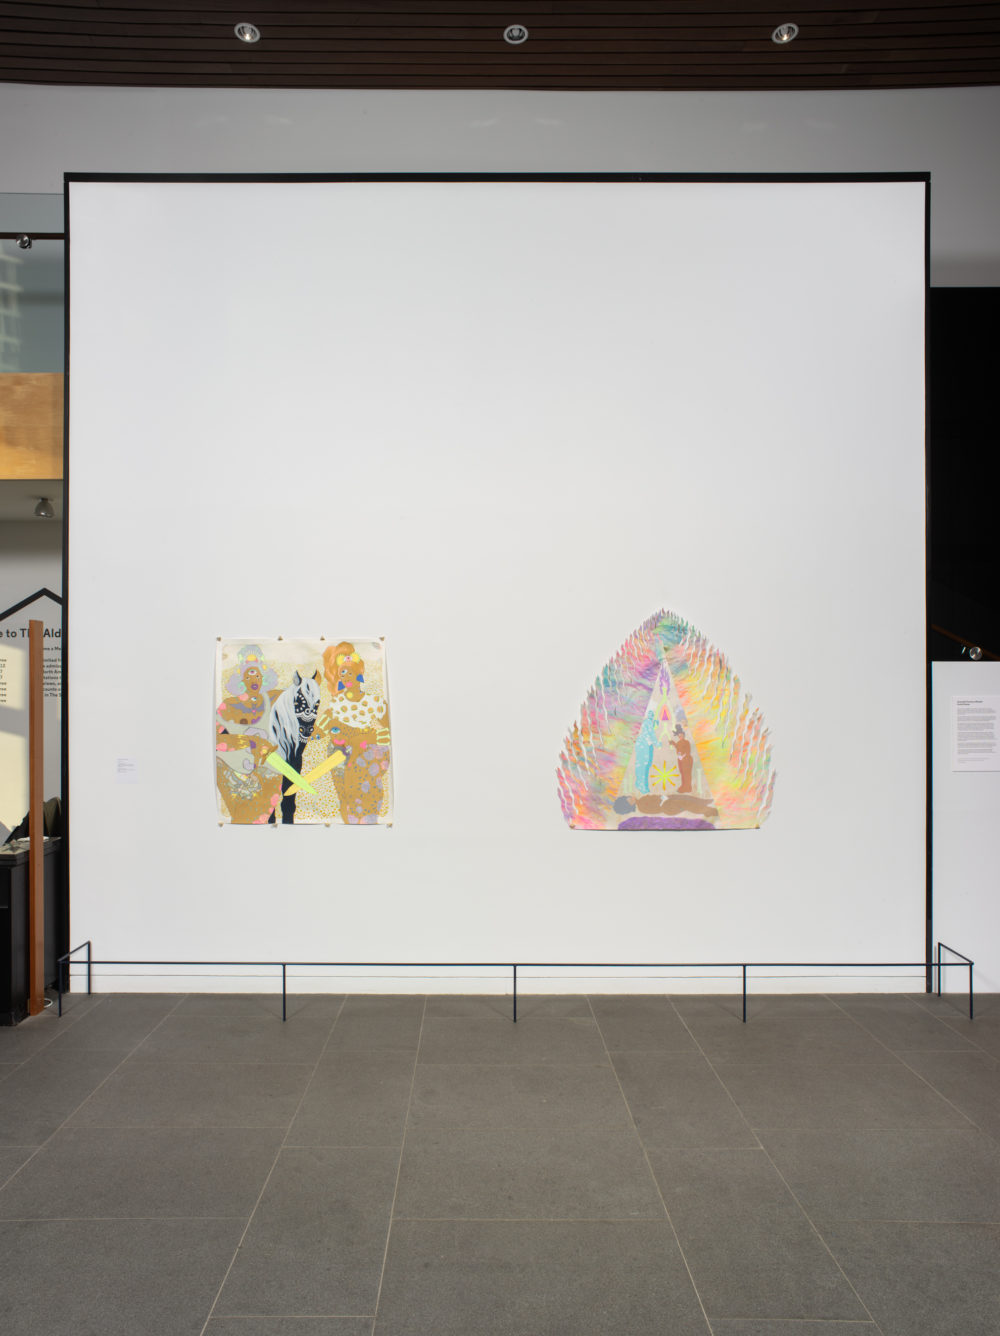 Two colorful figurative works with many symbols hung on a white wall.